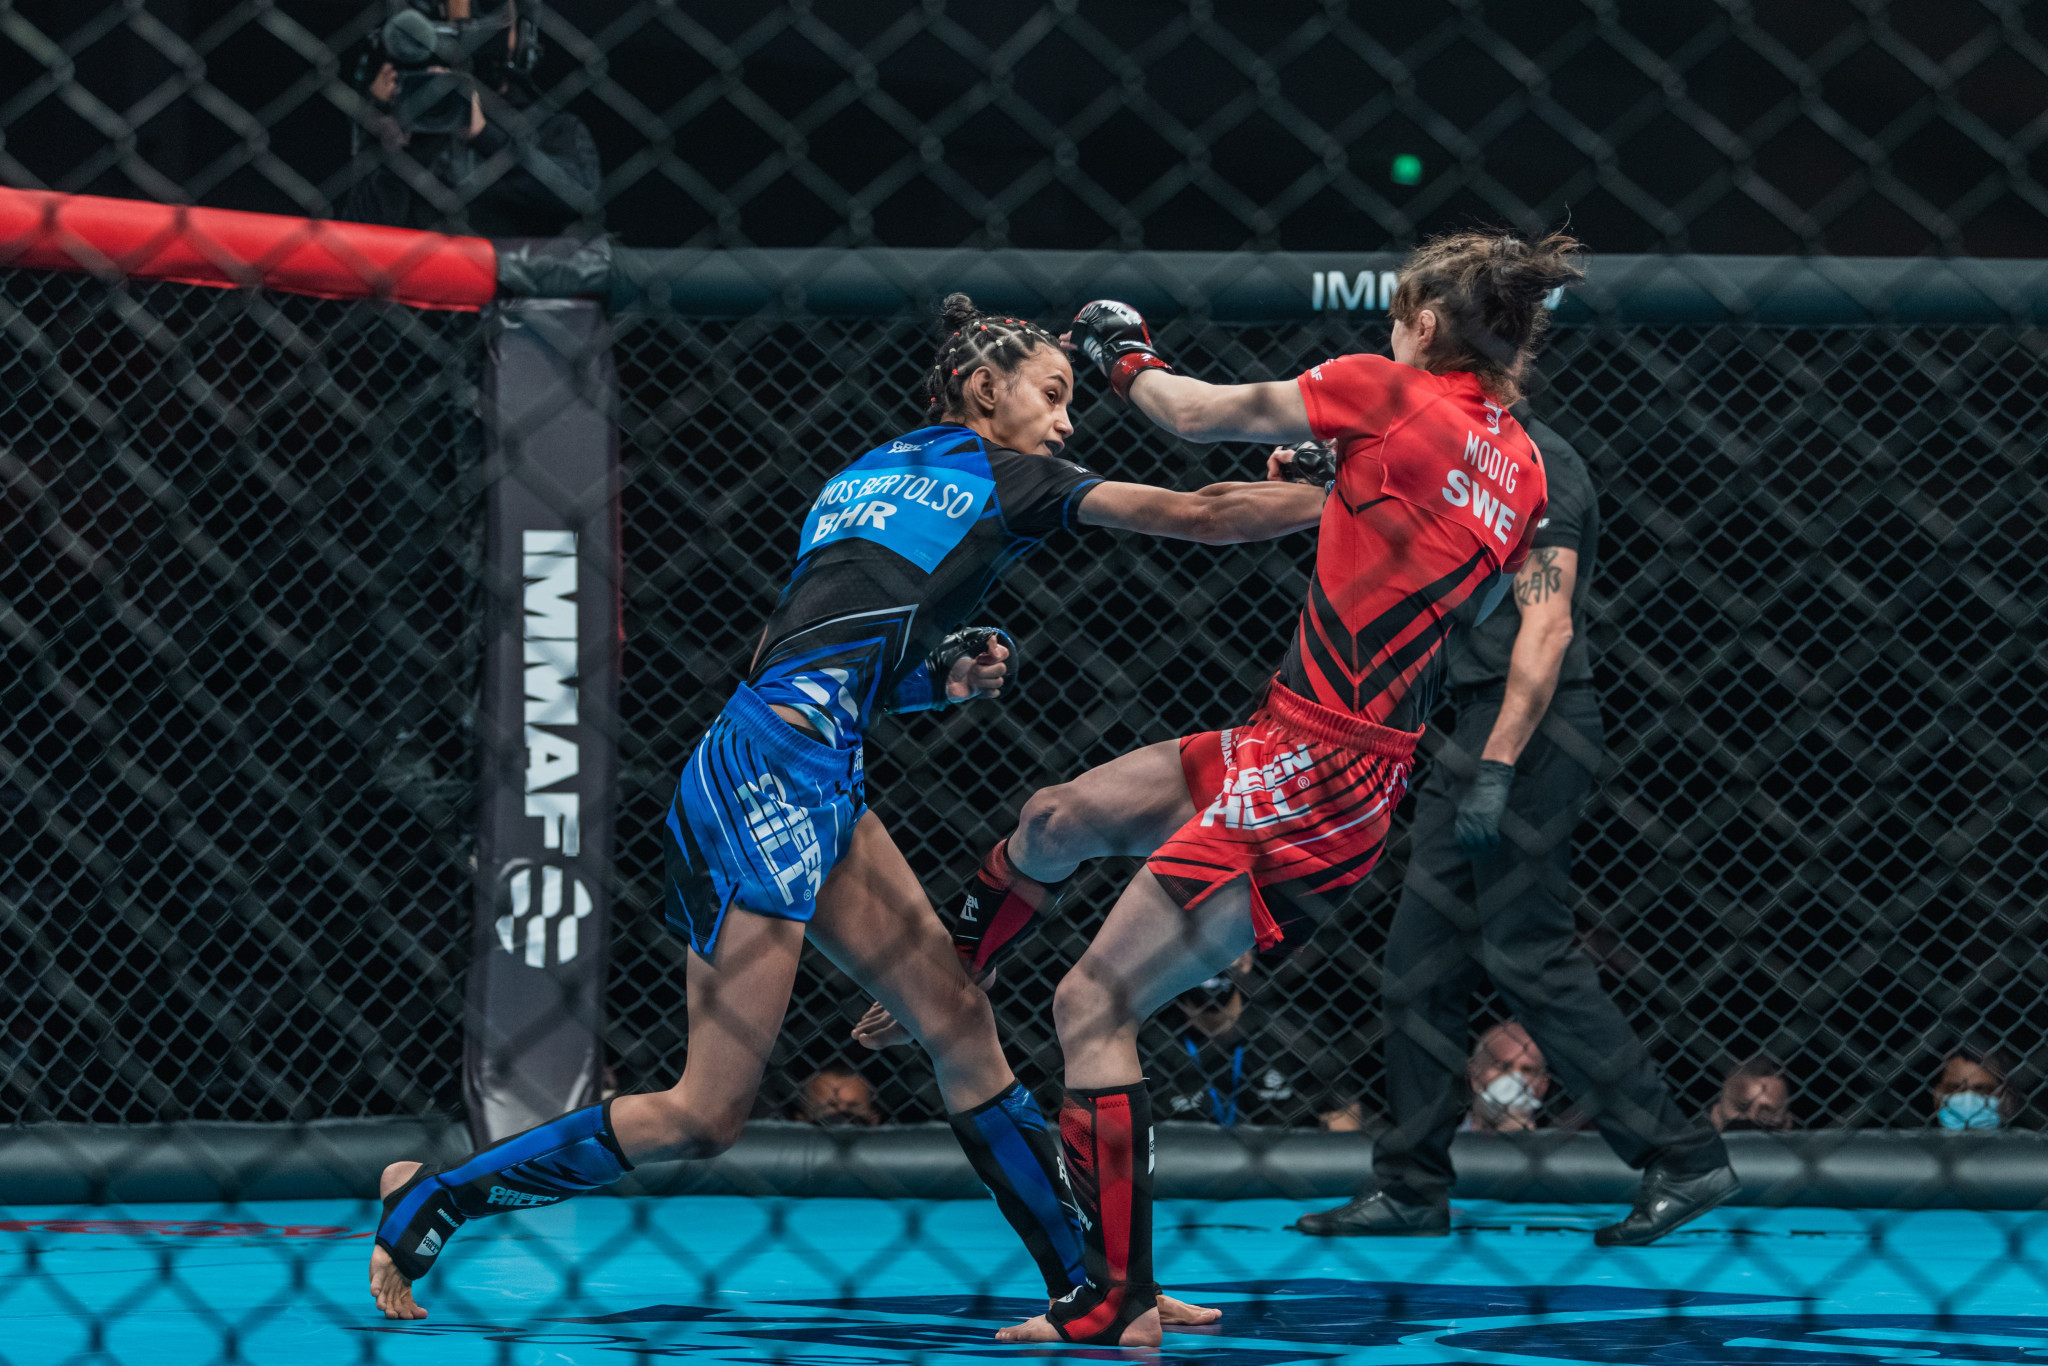 Mixed martial arts and IMMAF have struggled for recognition as a sport ©IMMAF